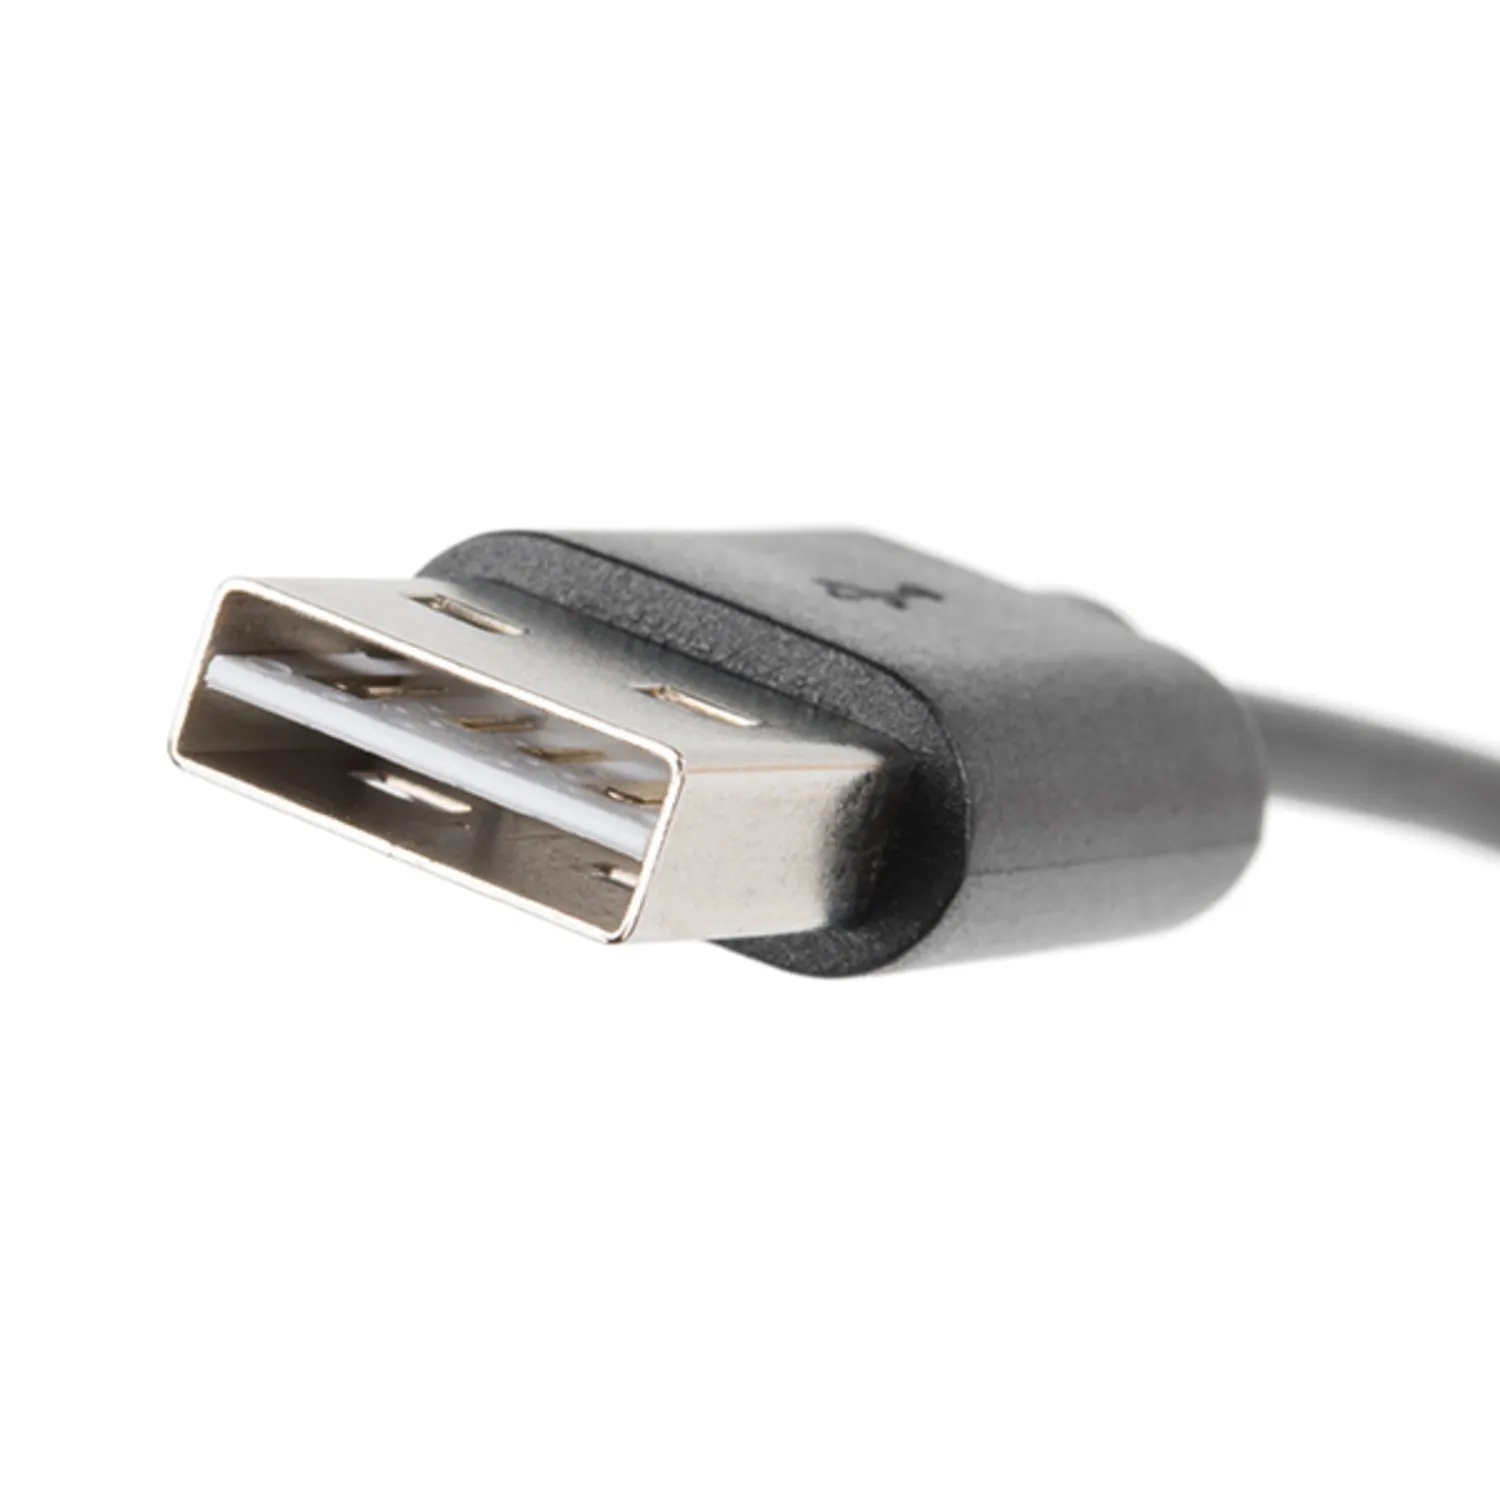 Photo of Reversible USB A to Reversible Micro-B Cable - 2m